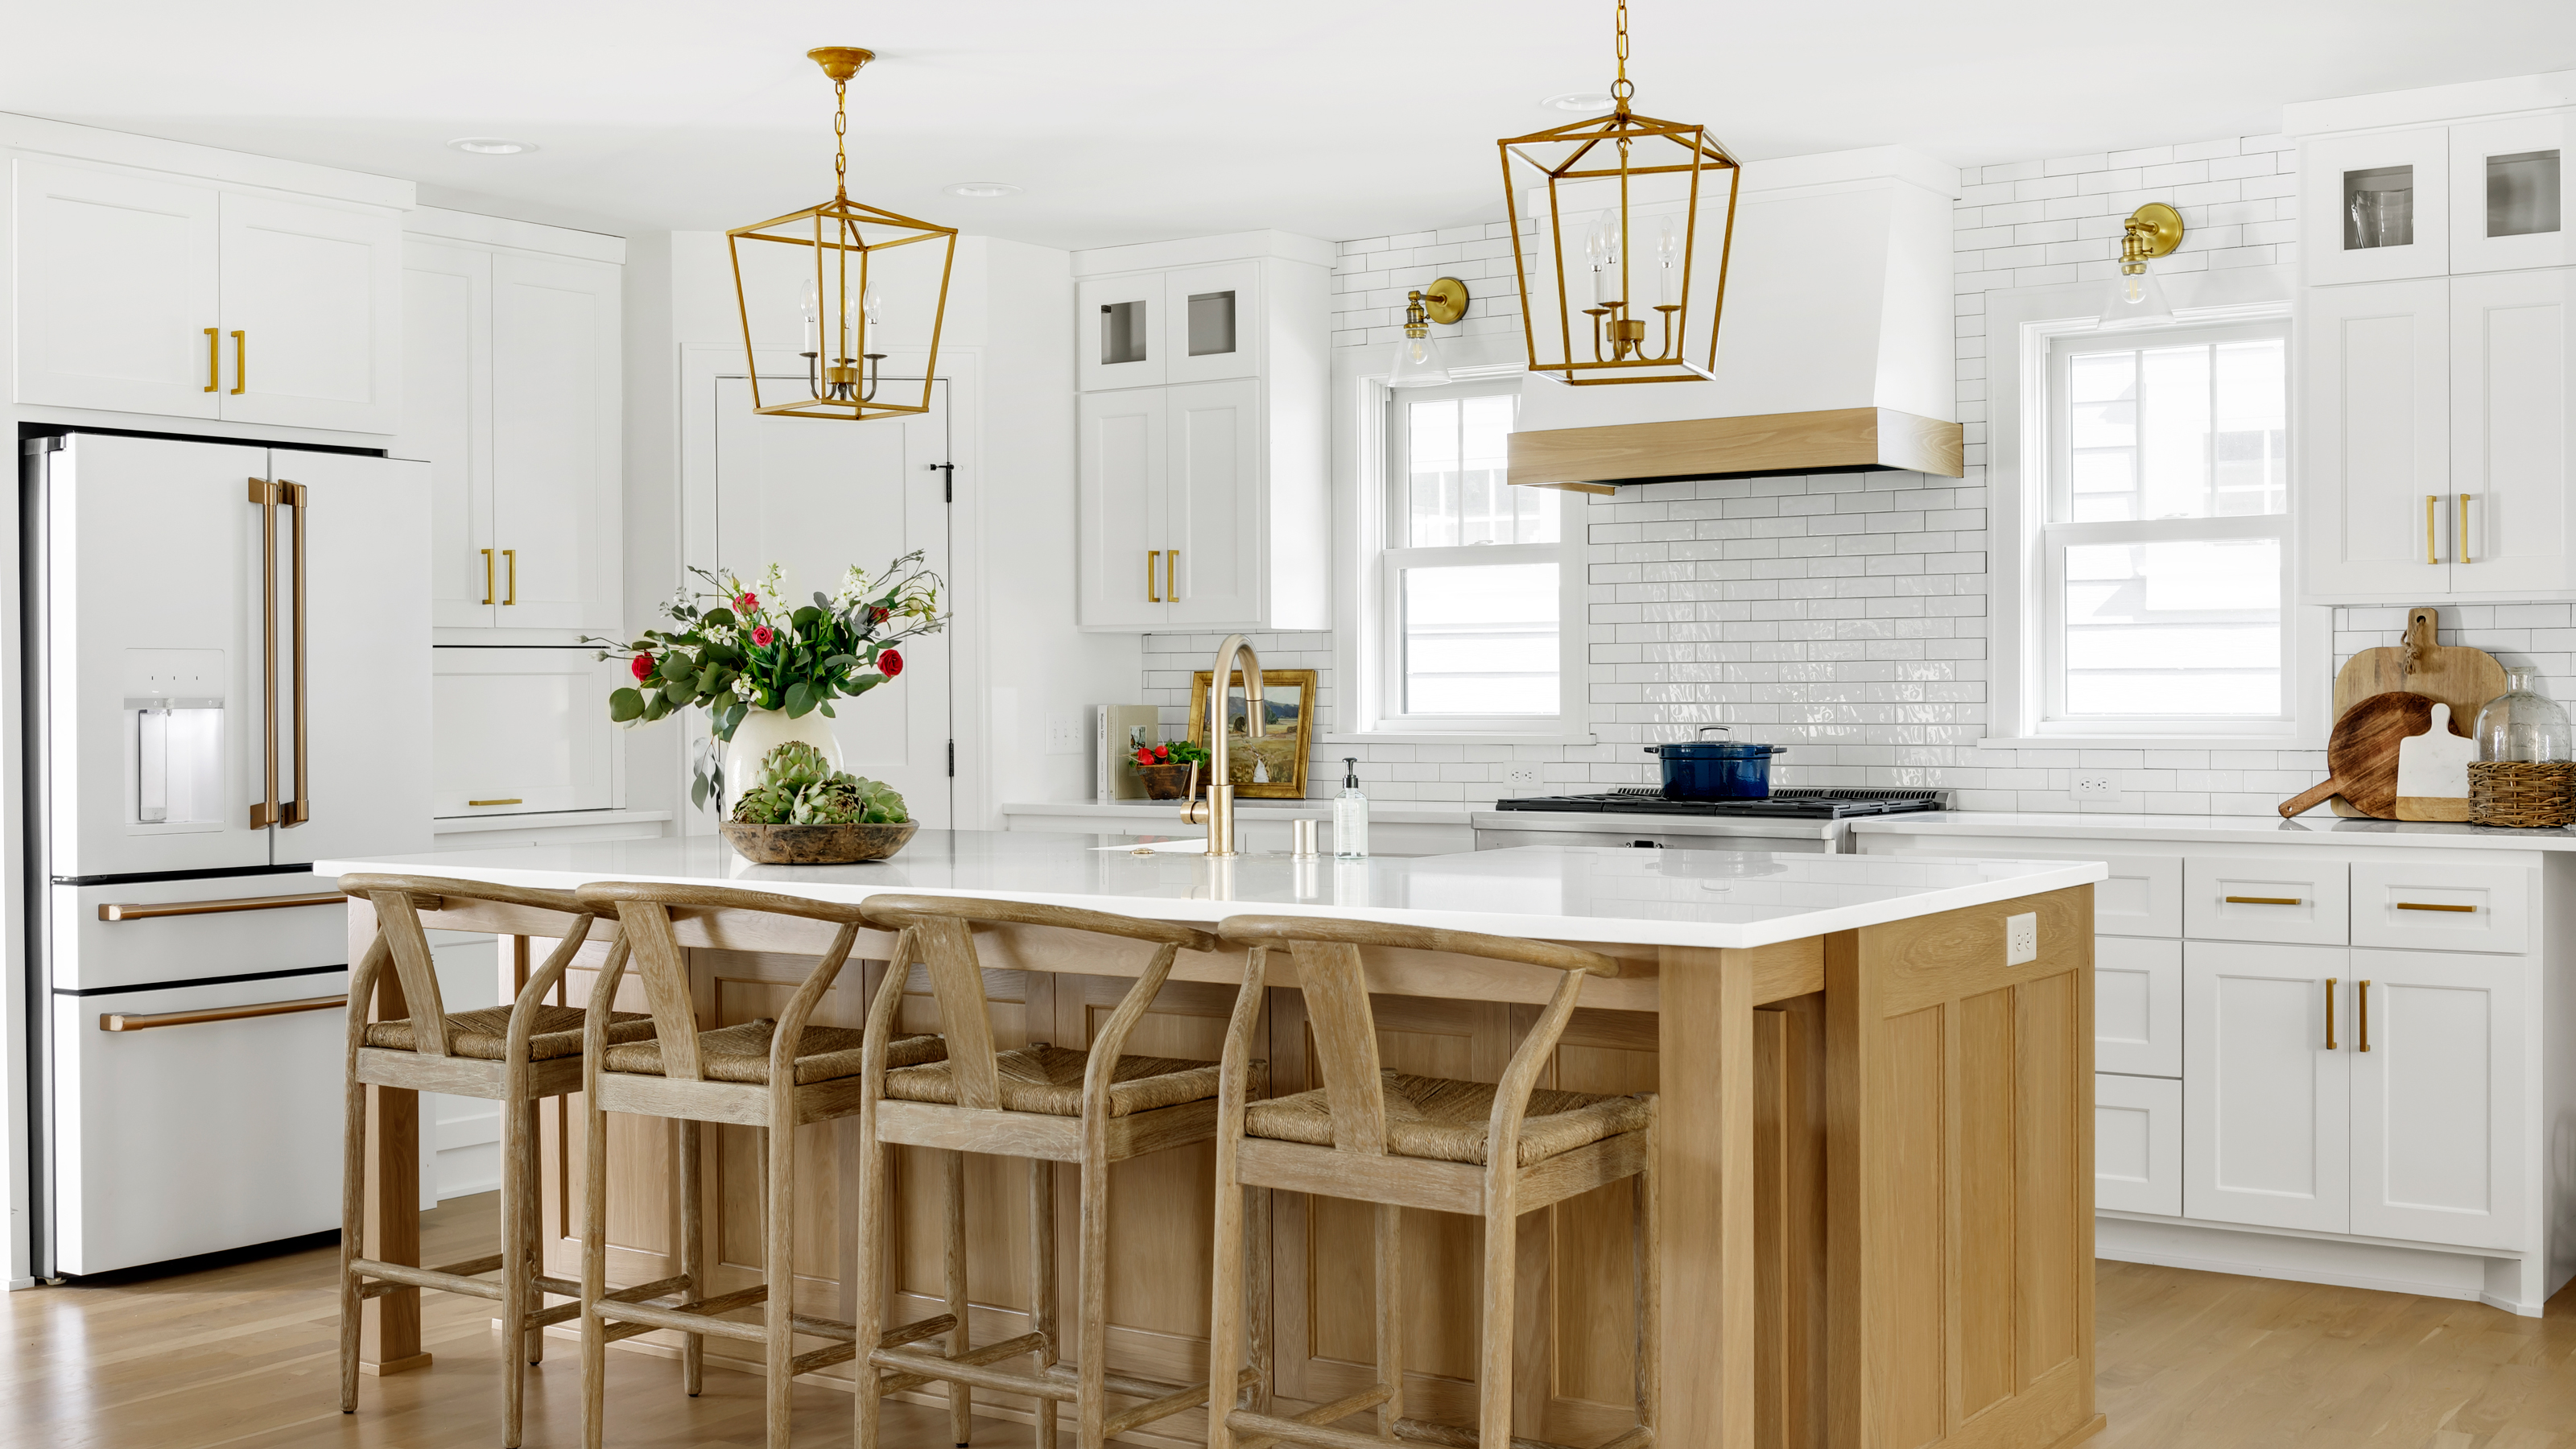 Kitchen Islands Vs. Peninsula in a dining room table